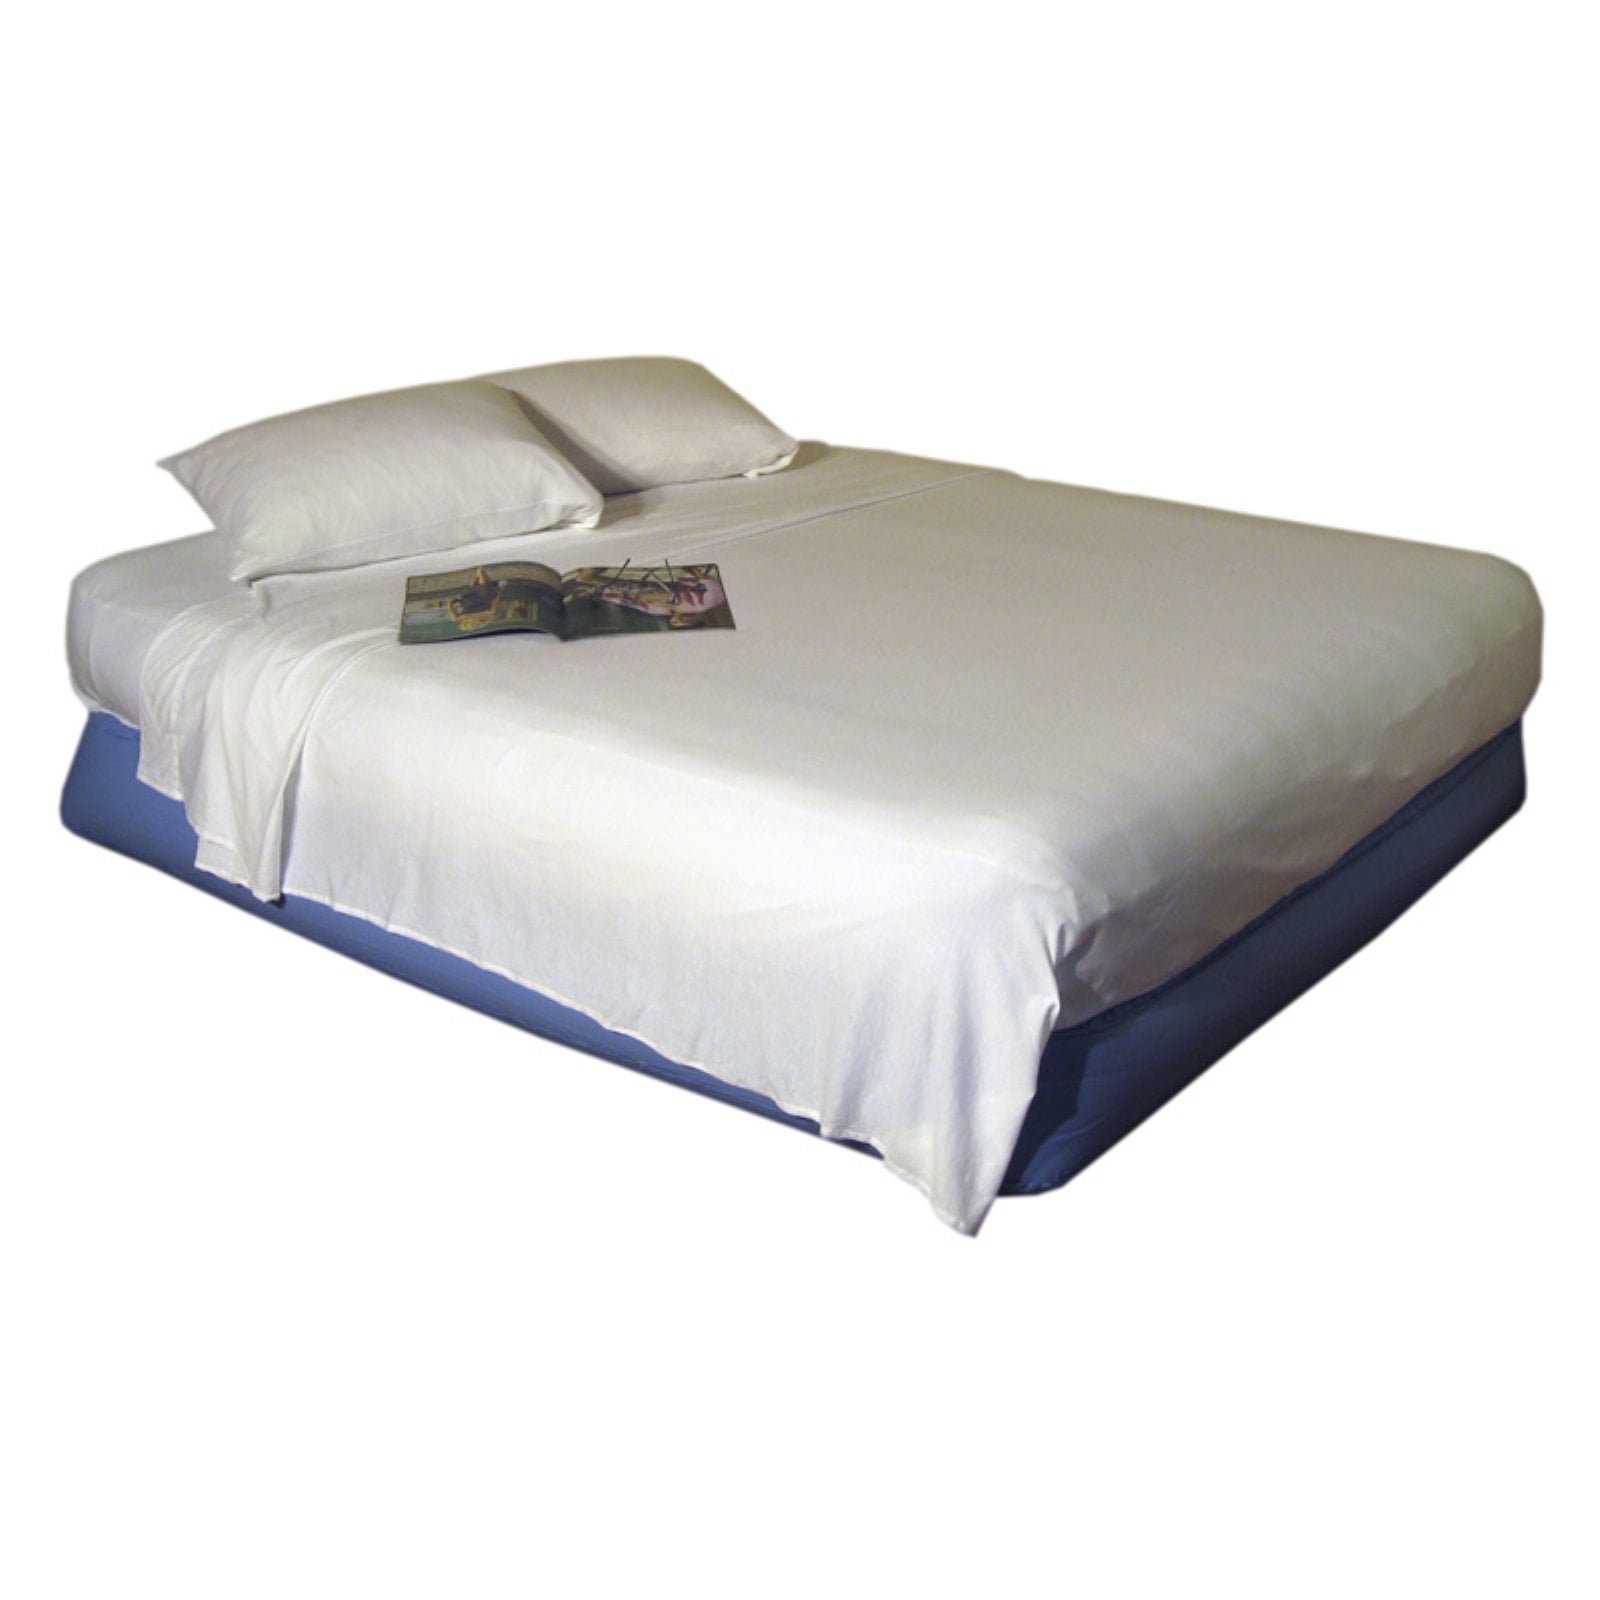 Insta Bed Raised Air With Neverflat, Insta Bed Ez Bed Twin